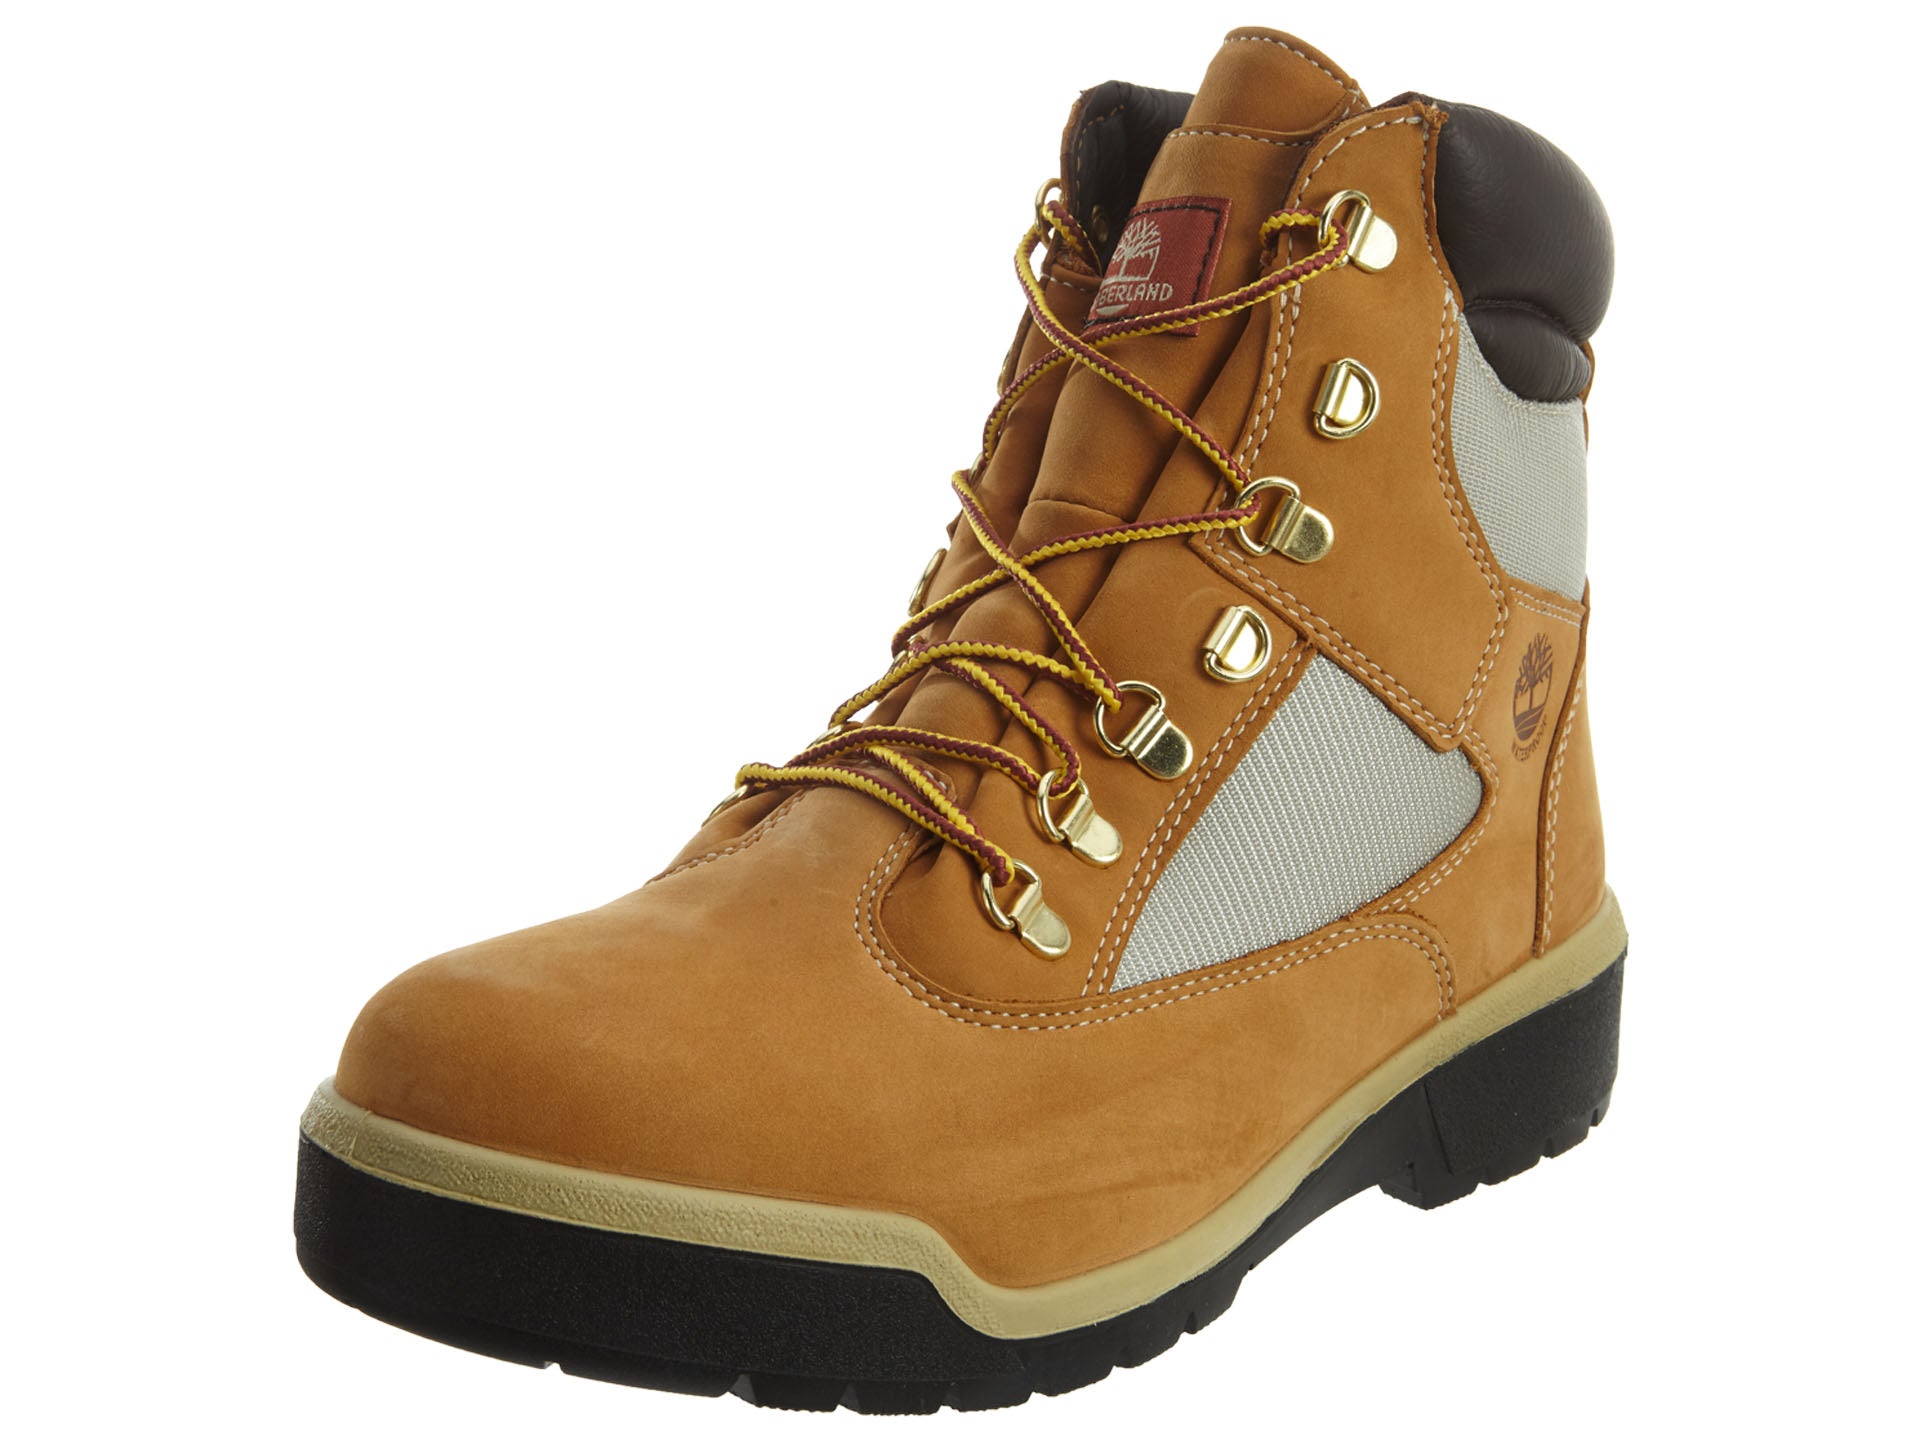 Timberland 6" Field Boots Mens Style : Tb0a18qv